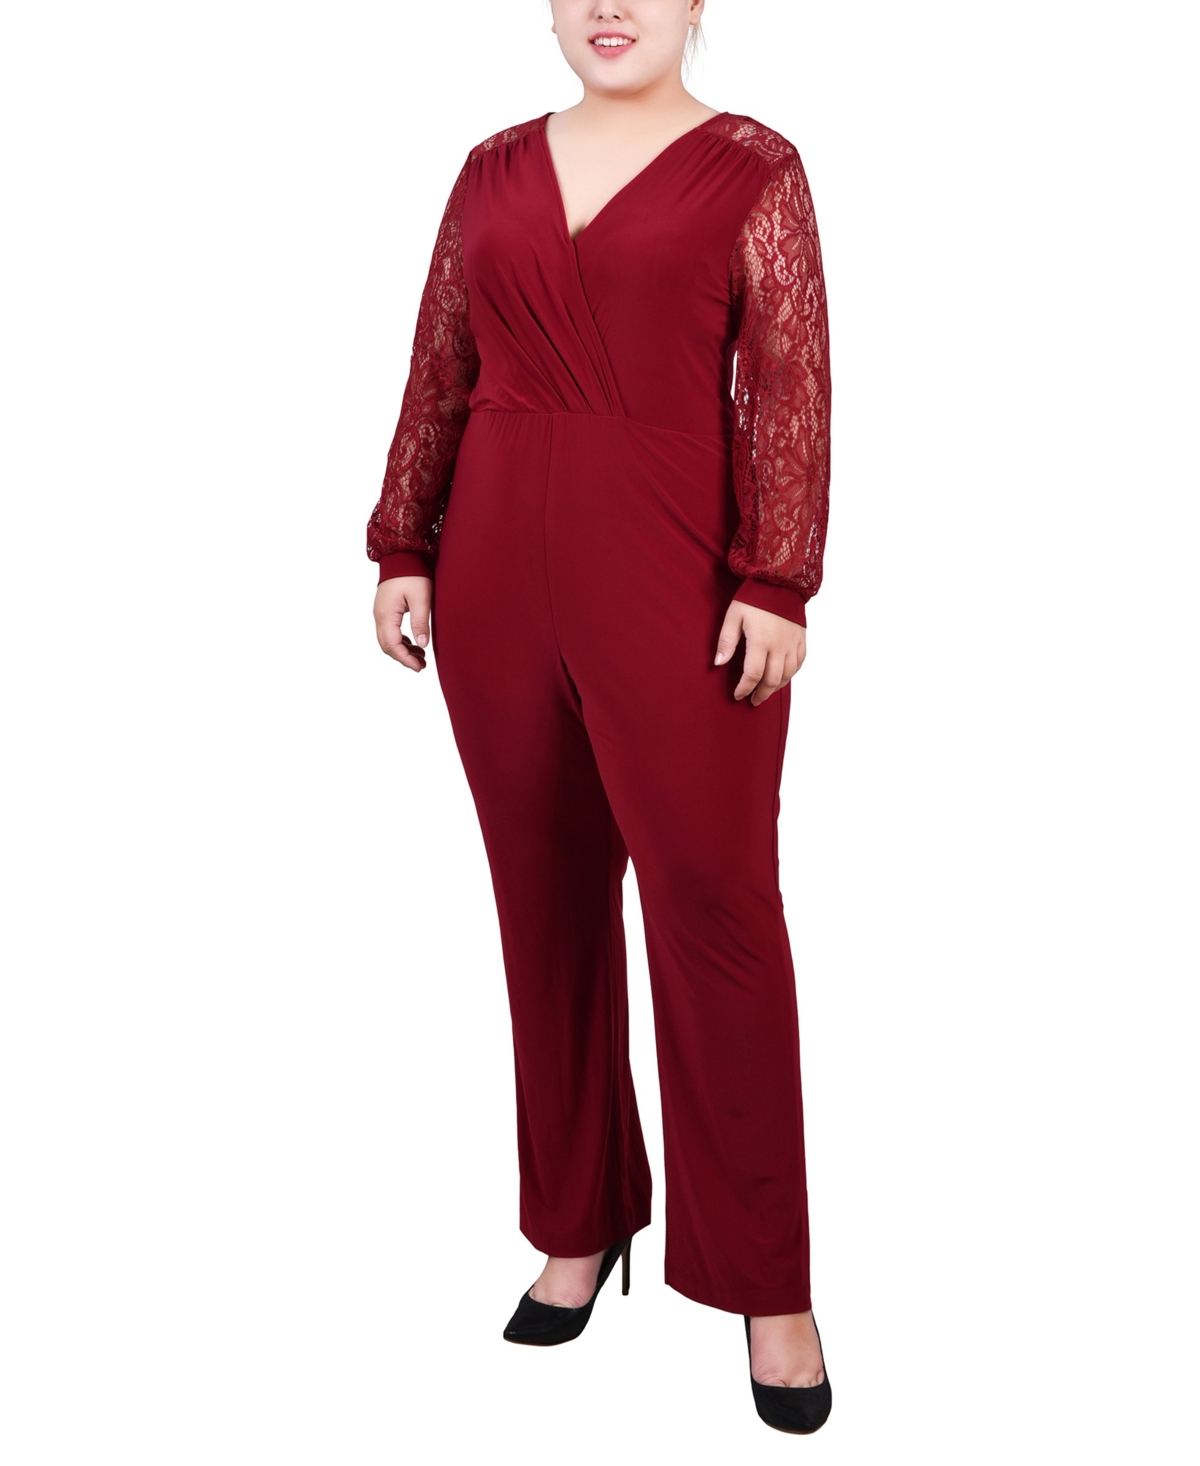 NY COLLECTION PLUS SIZE JUMPSUIT WITH LACE SLEEVE